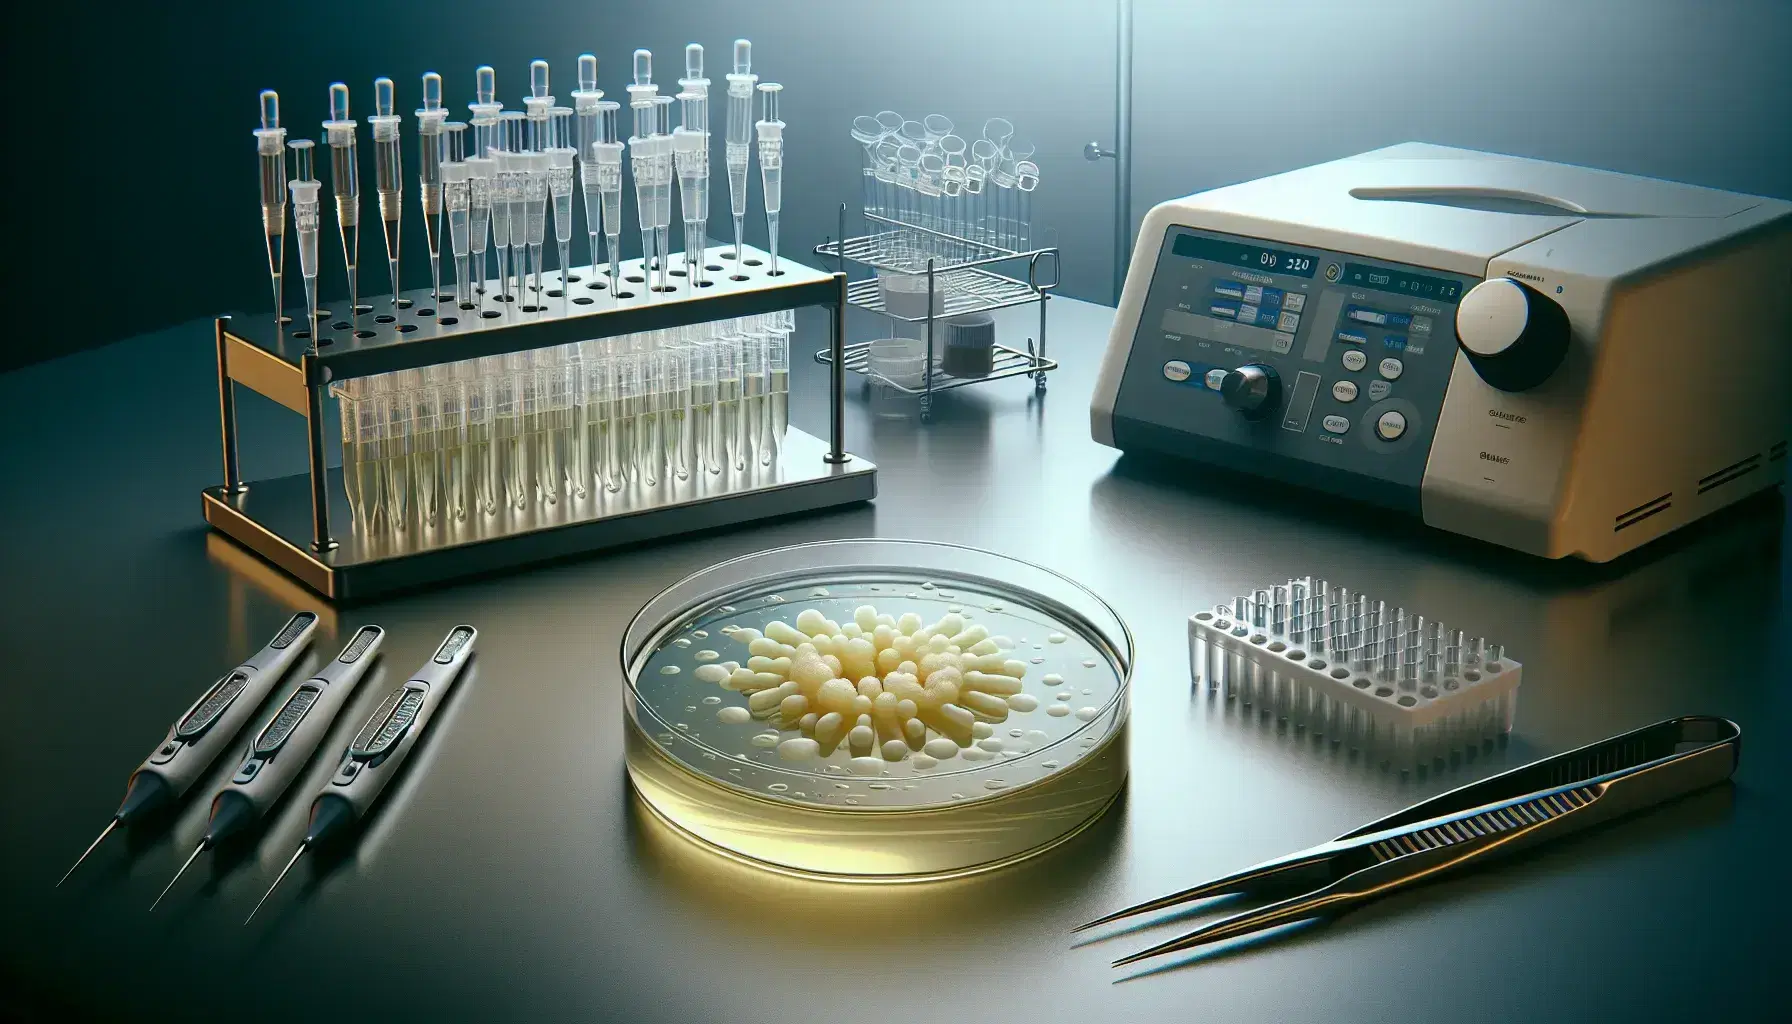 Laboratory workbench with petri dish showing bacterial colonies, micro-pipettes in a stand, a digital microcentrifuge, and sterile pipette tips.